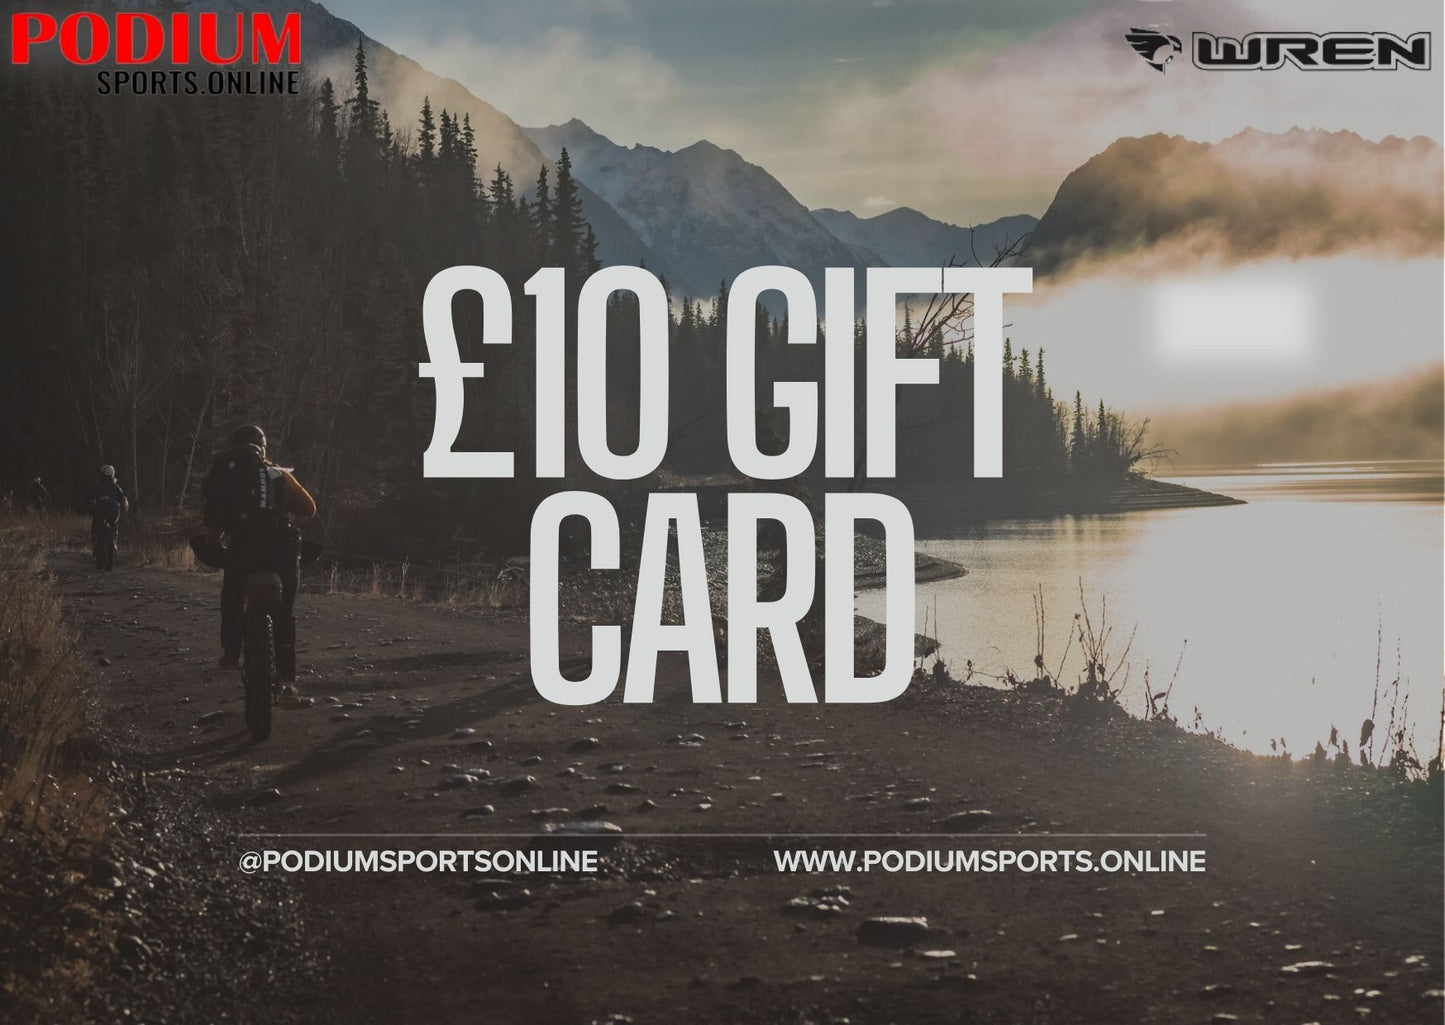 Podiums Sports Online Gift Cards